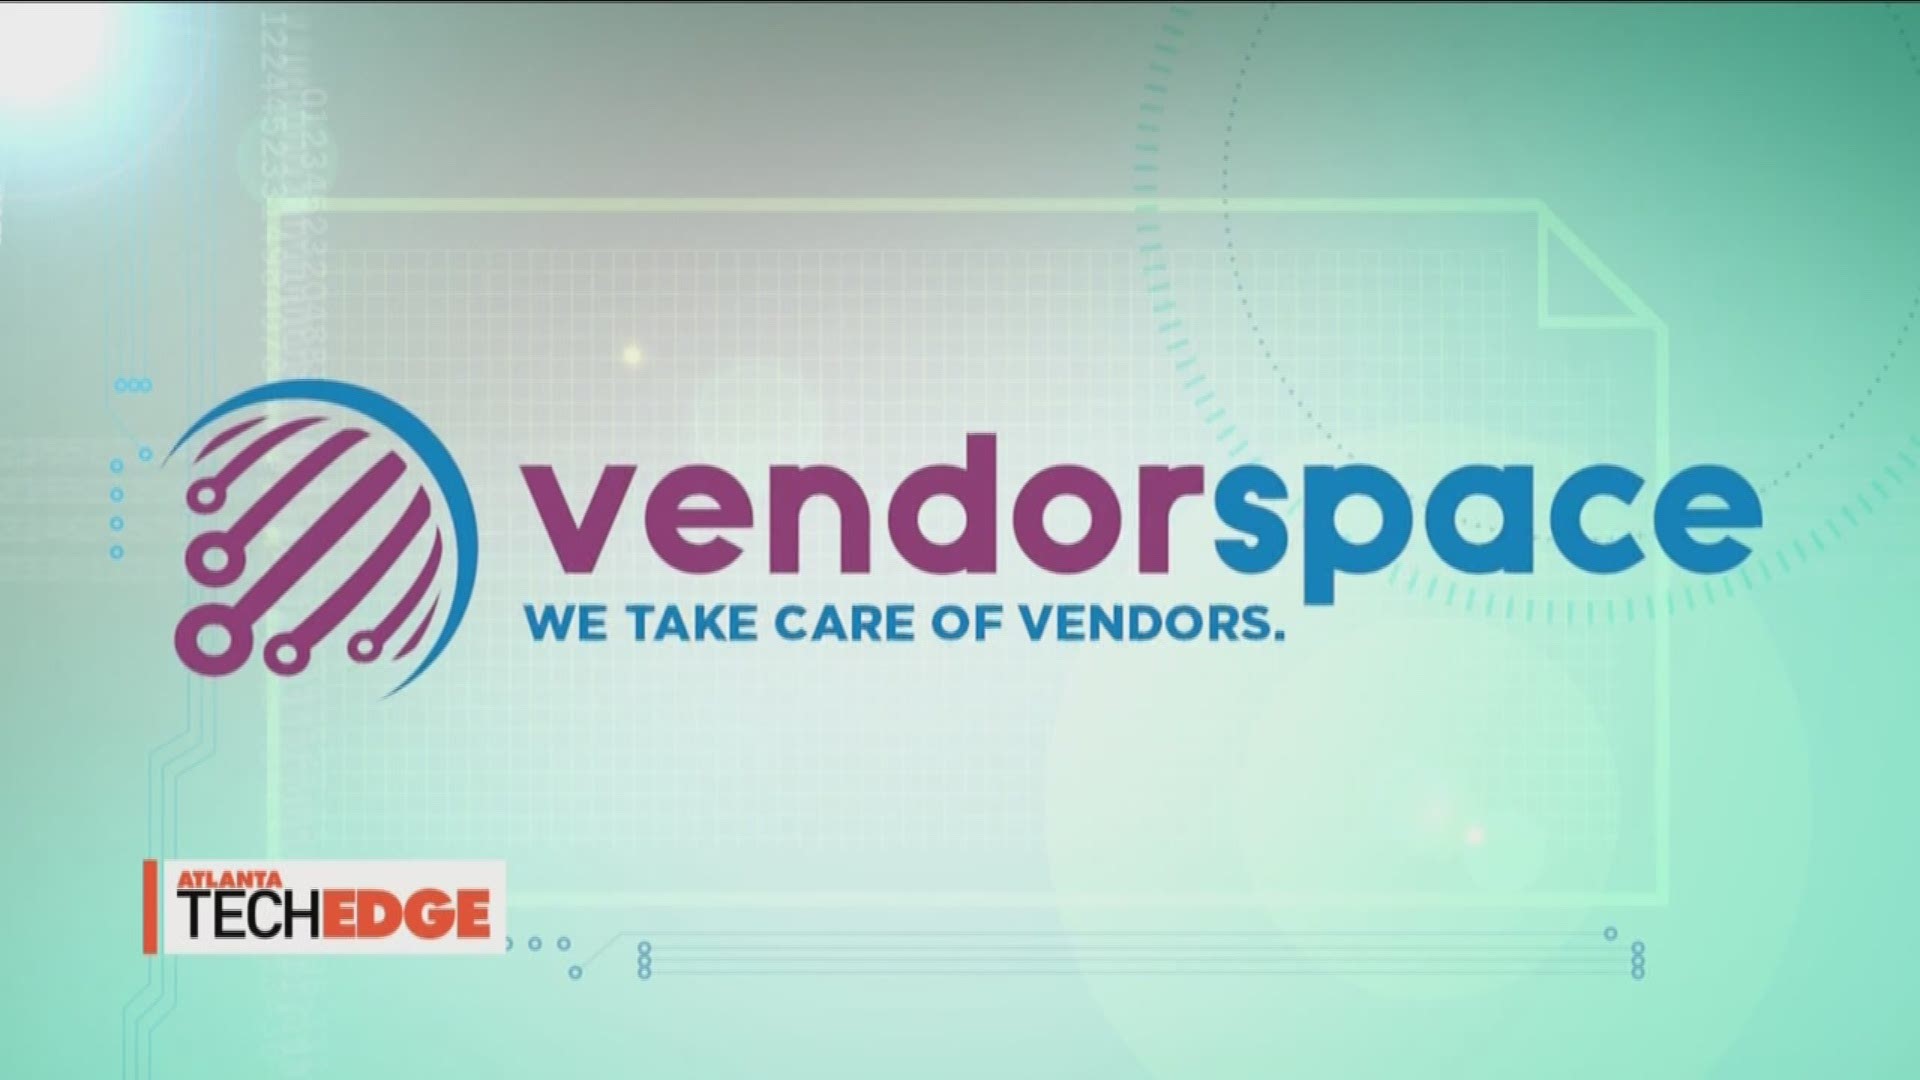 Tinder for event planners! Learn about the 'vendorspace' app on 'Atlanta Tech Edge'